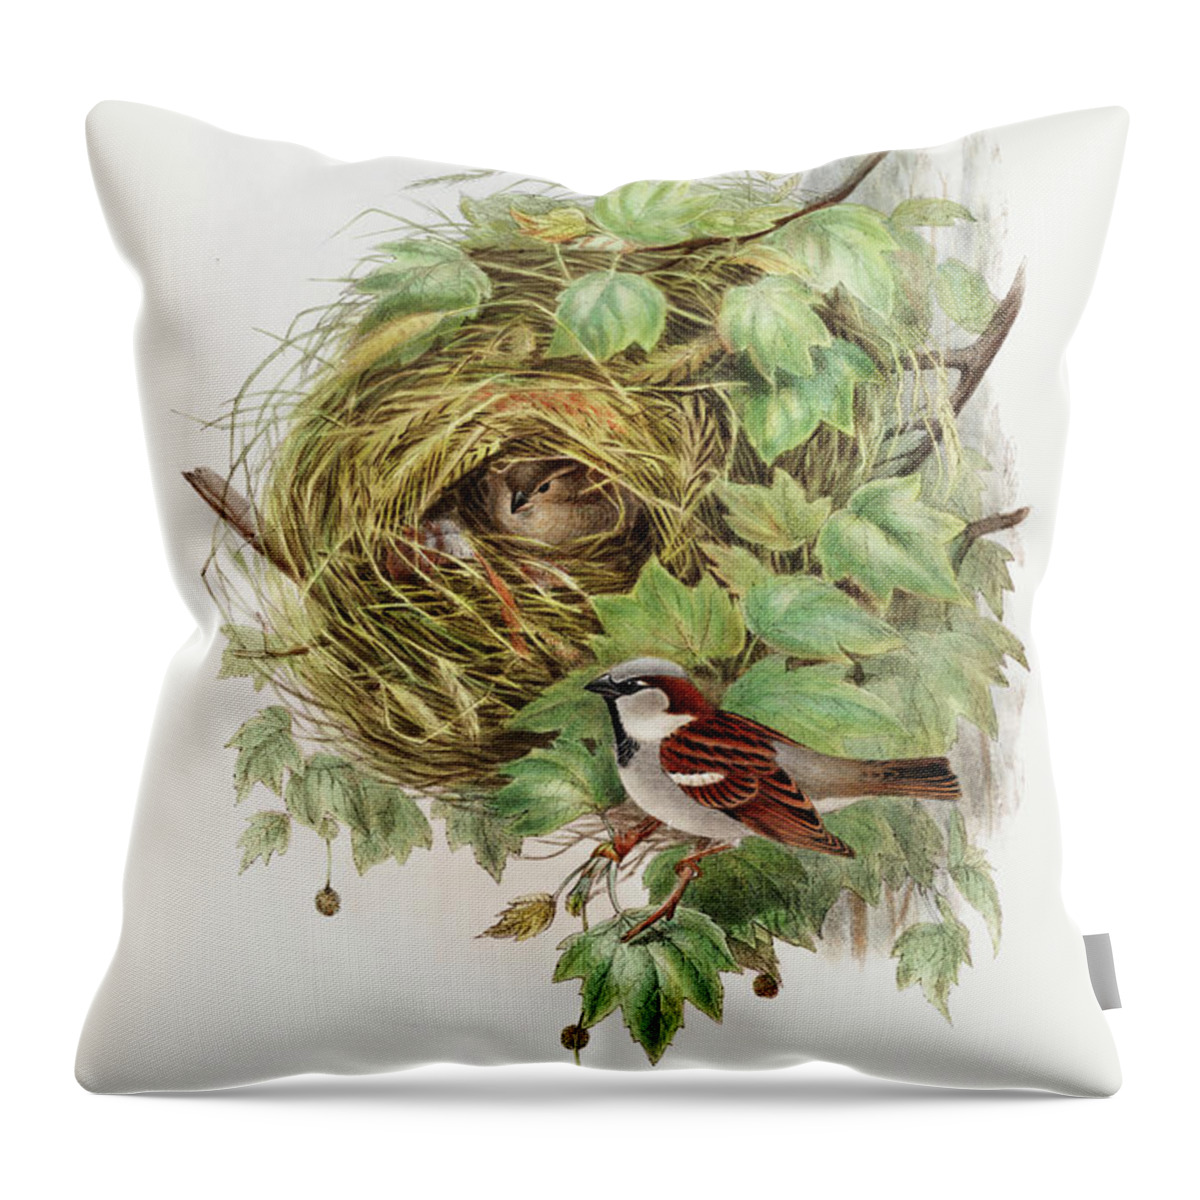 Passer Domesticus Throw Pillow featuring the drawing Passer Domesticus, House Sparrow by John Gould